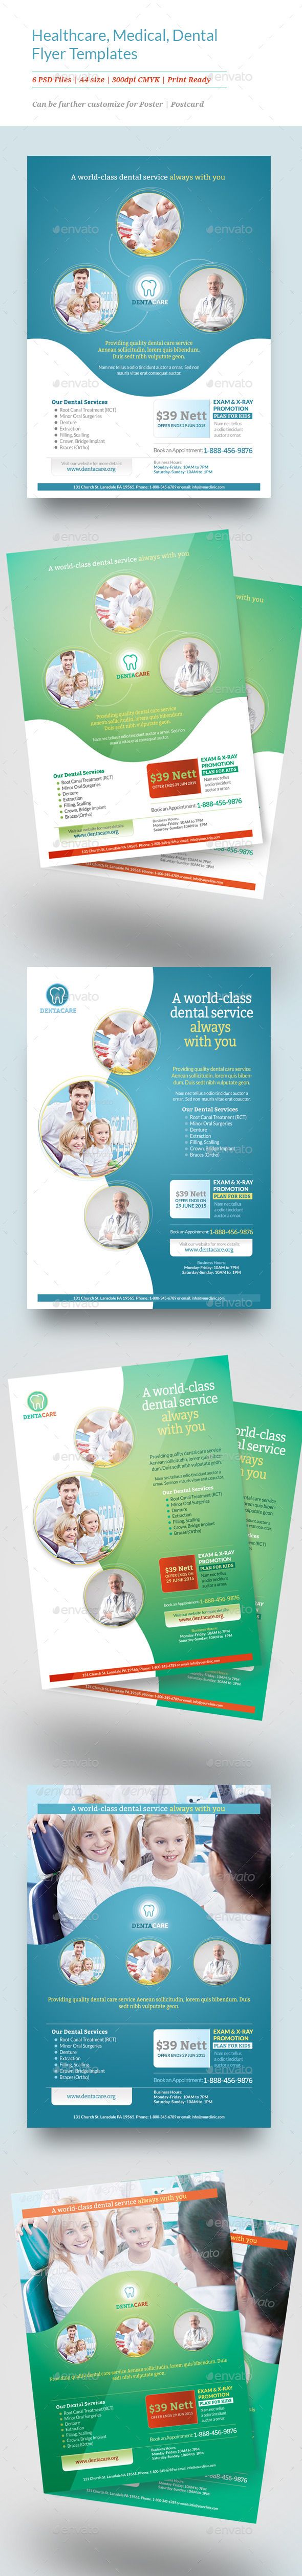 Healthcare-Advertising-Healthcare-Medical-Dental-Flyer-Templates-Corporate Healthcare Advertising : Healthcare, Medical, Dental Flyer Templates - Corporate Flyers